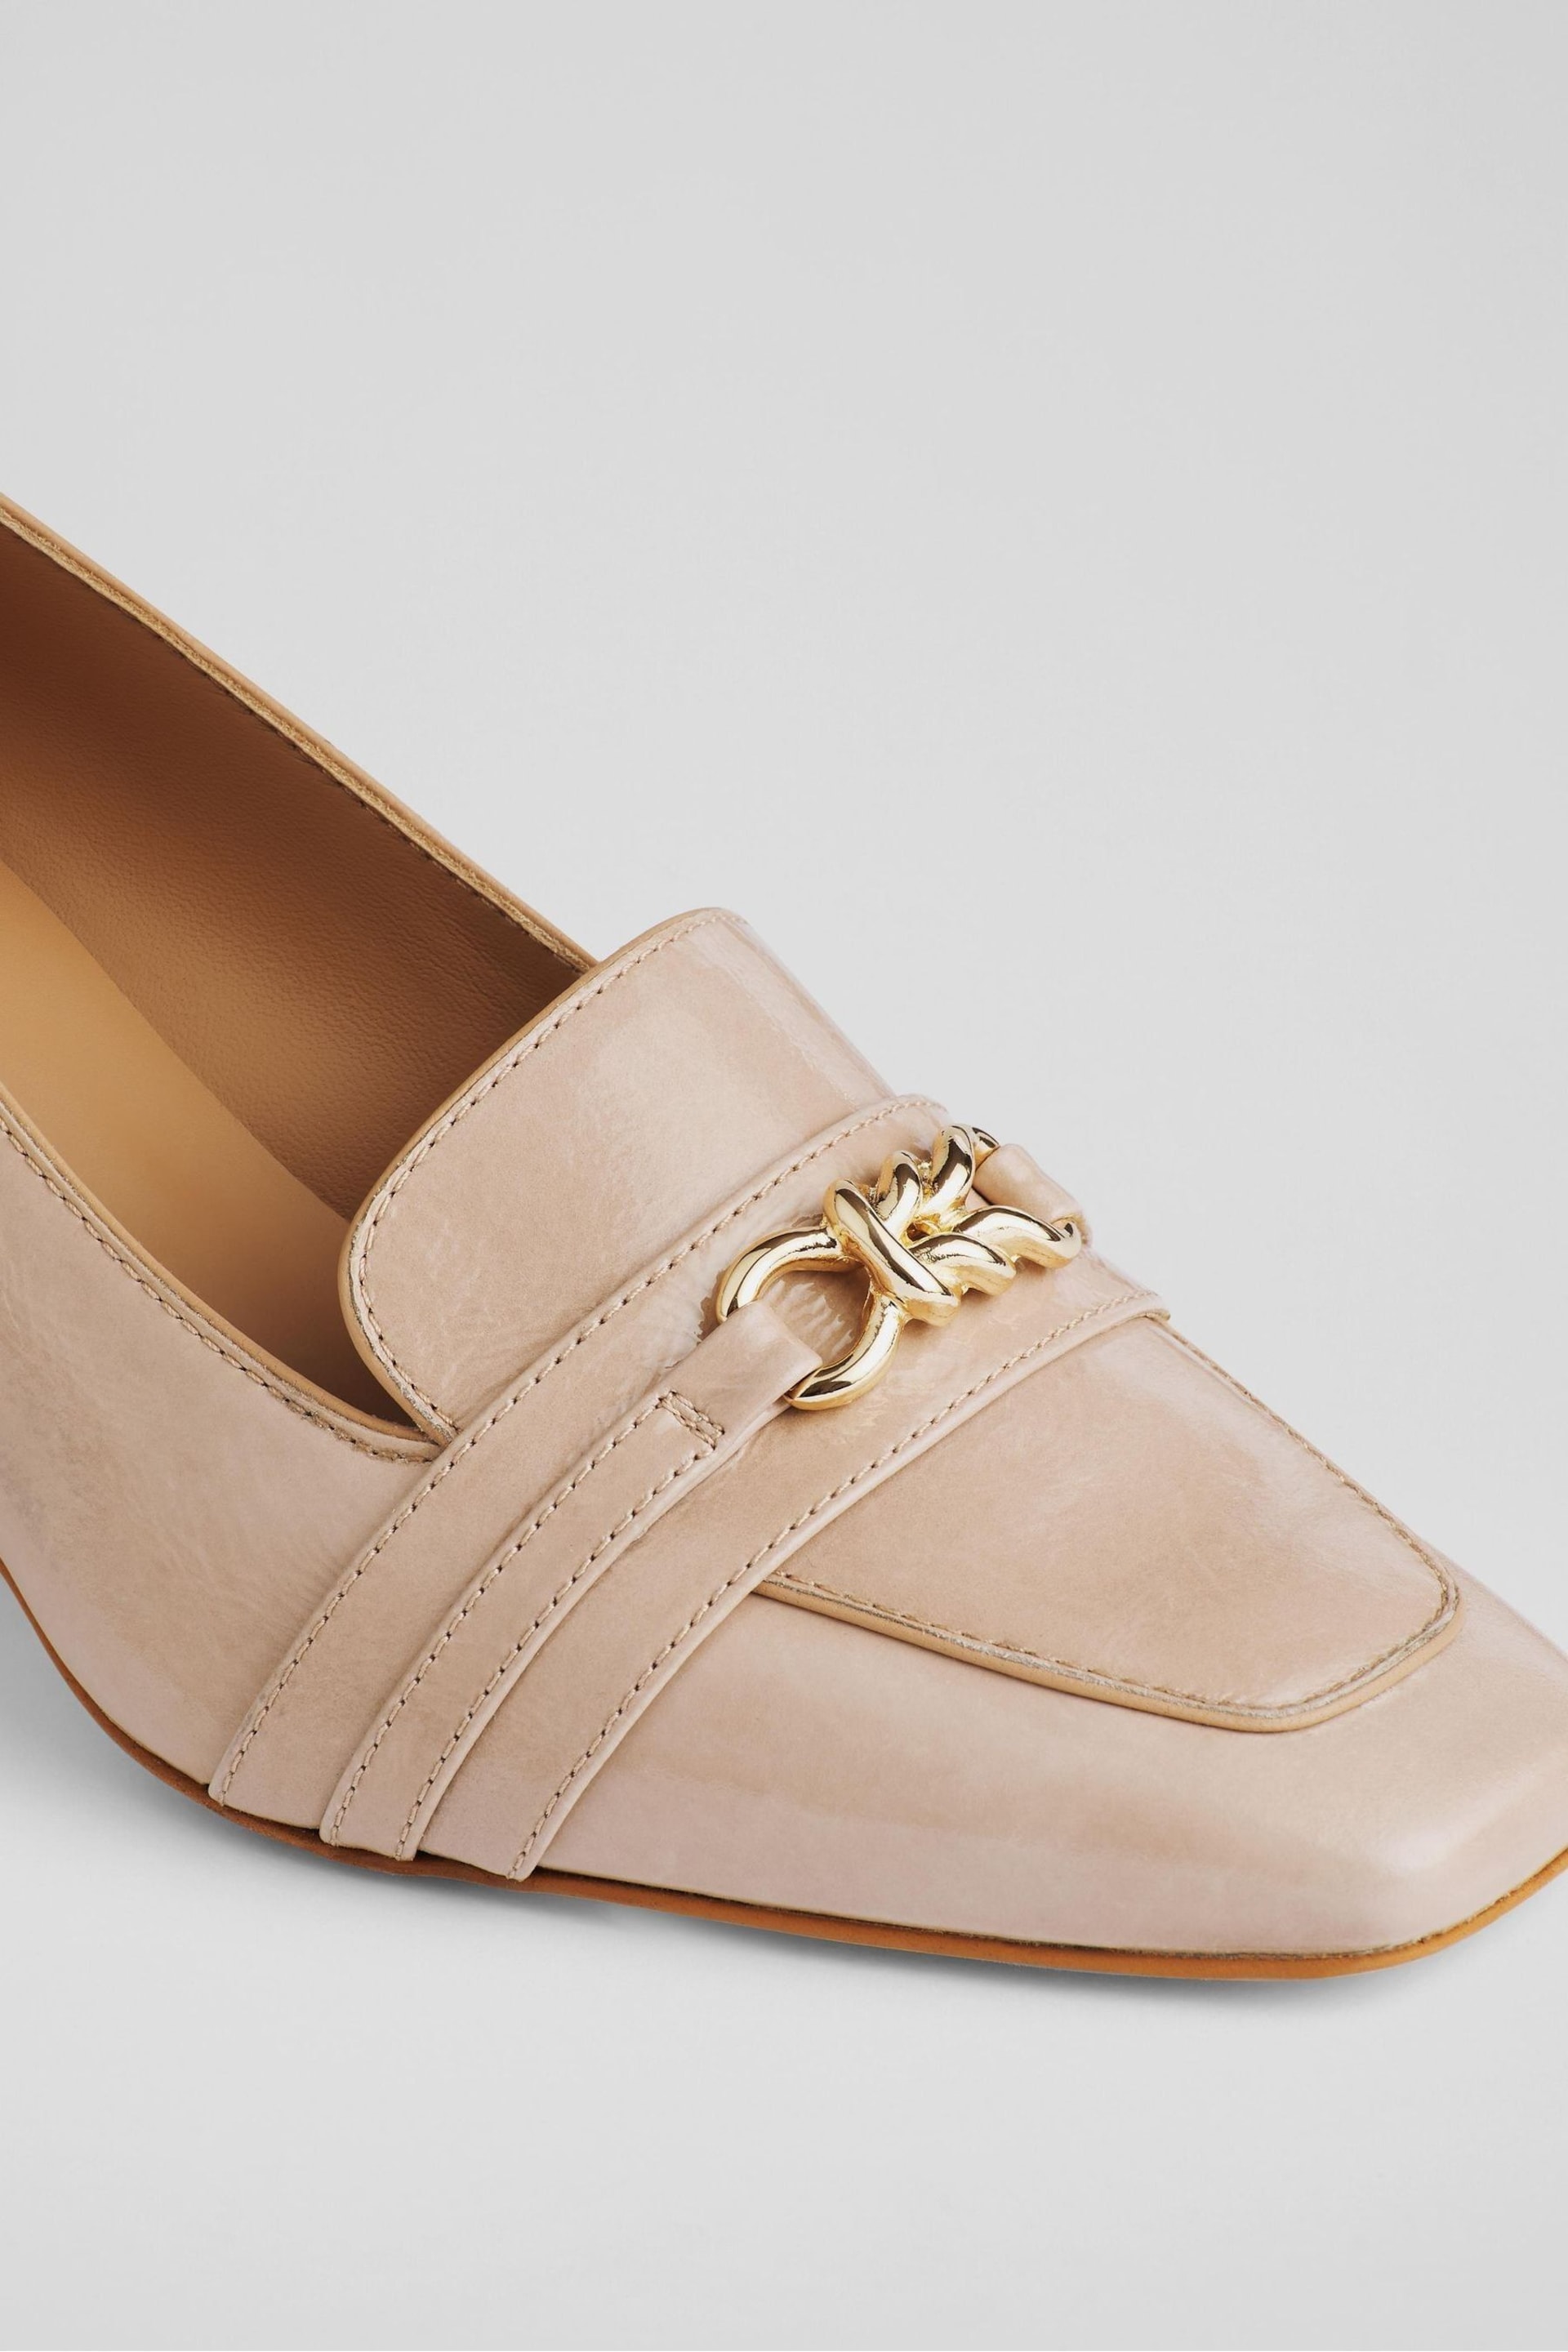 LK Bennett Natural Sydnie Trench Twist Trim Loafer Court Shoes - Image 4 of 4